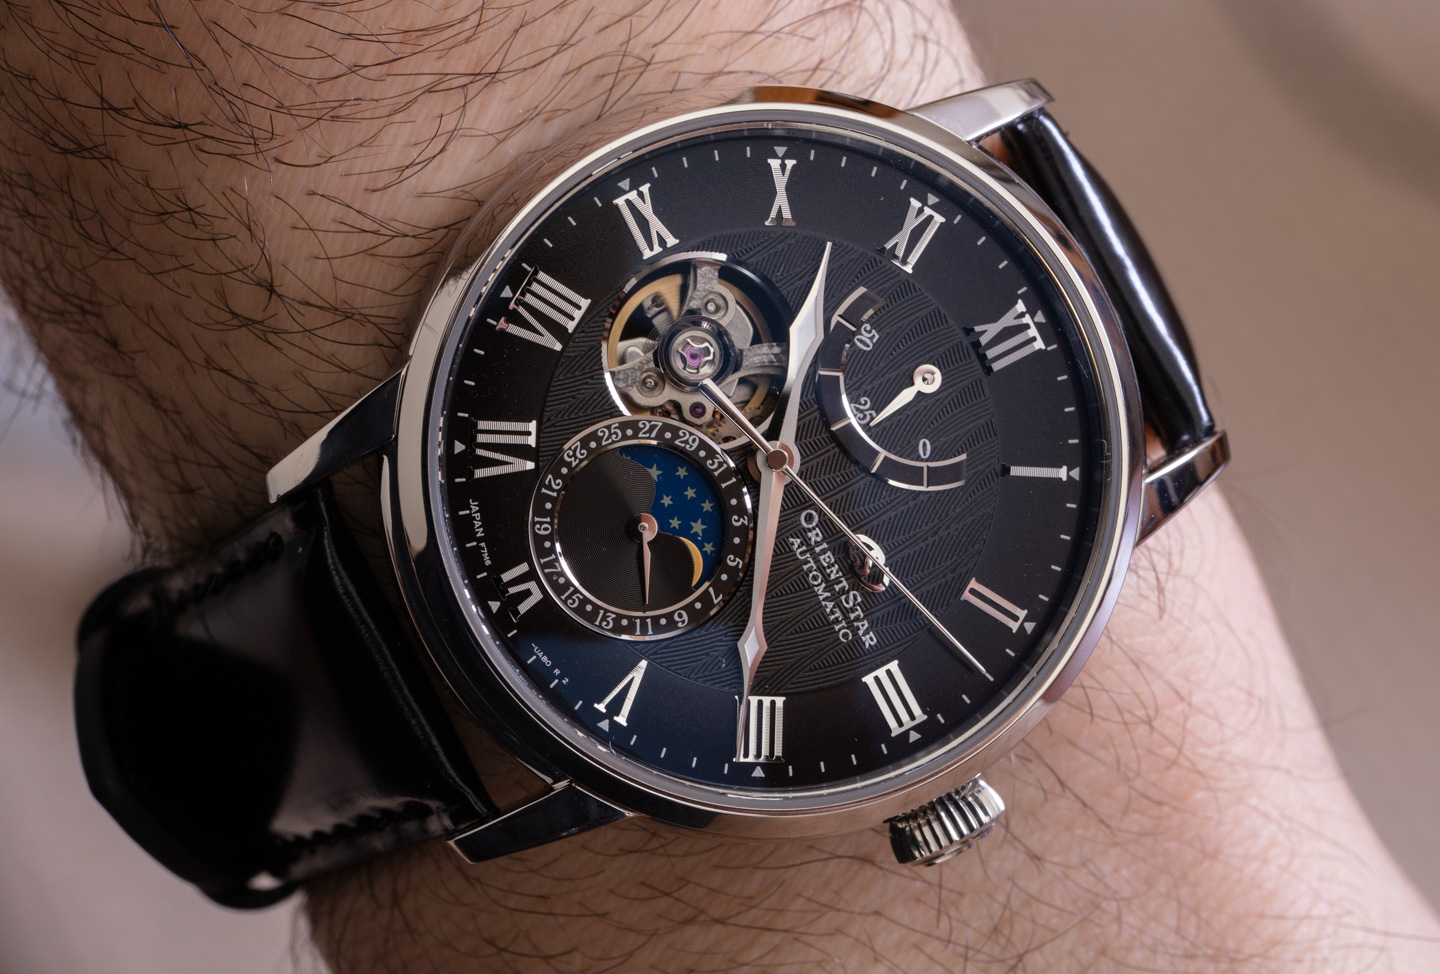 Watch Review: Orient Star Mechanical Classic RE-AY0107N